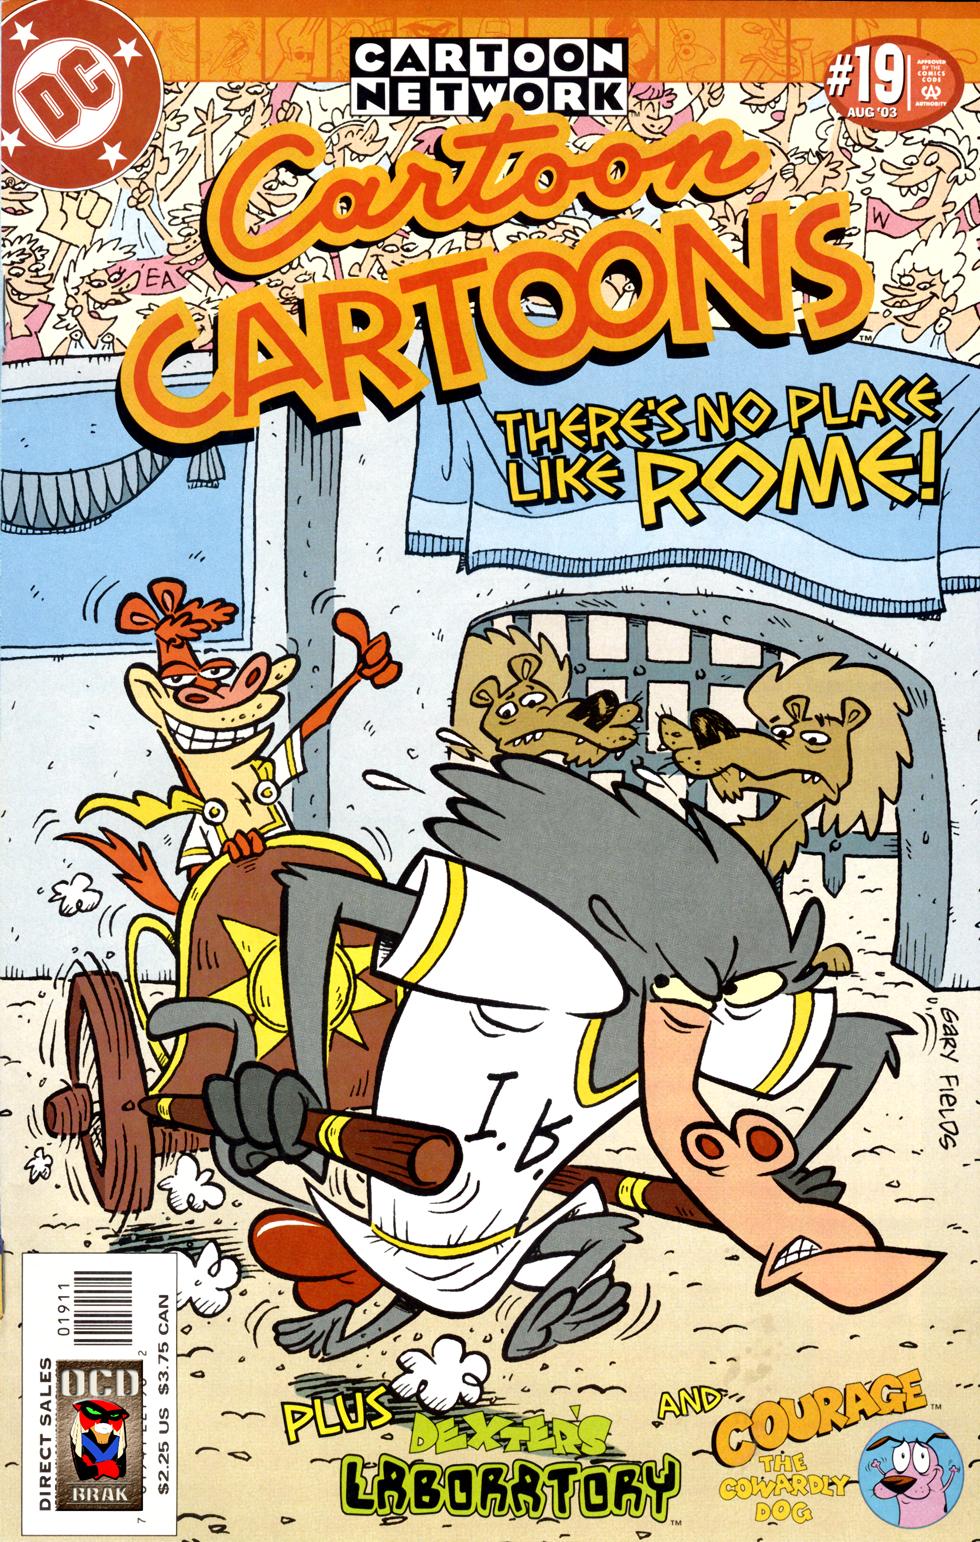 Cartoon Cartoons Issue 19 | Read Cartoon Cartoons Issue 19 comic online in  high quality. Read Full Comic online for free - Read comics online in high  quality .